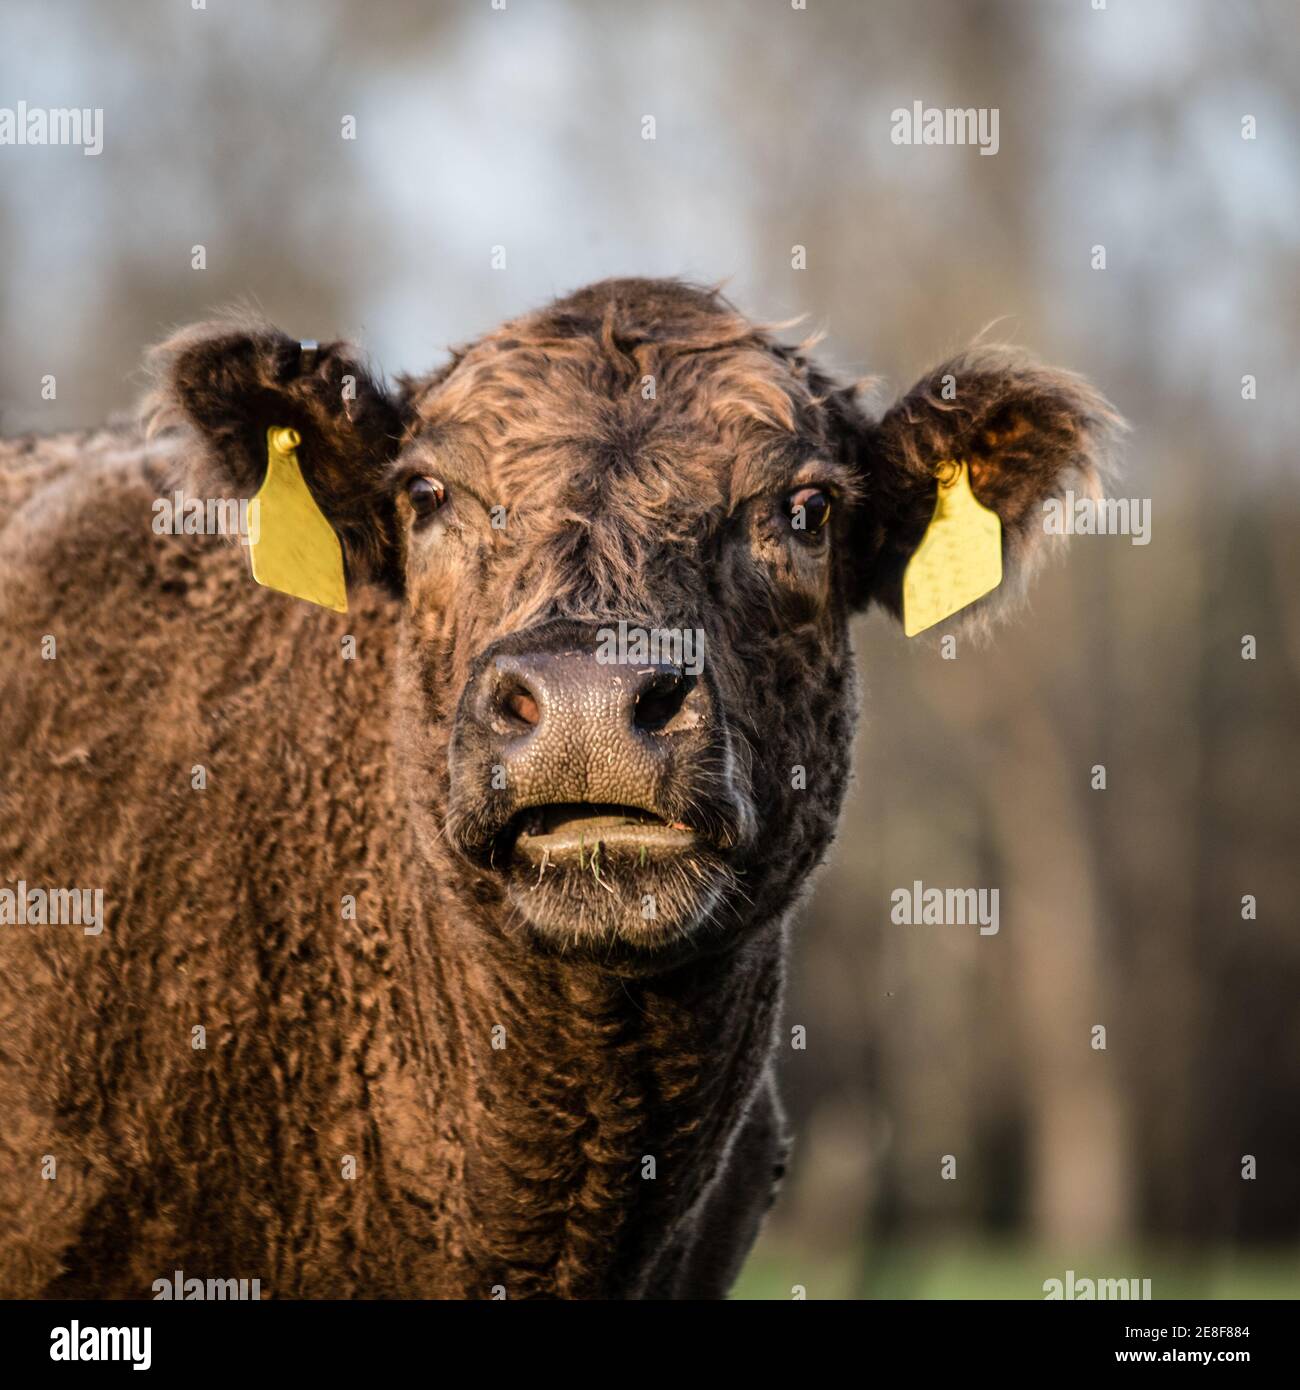 Square image of a brown crossbred beef cow with her head up looking at the camera Stock Photo